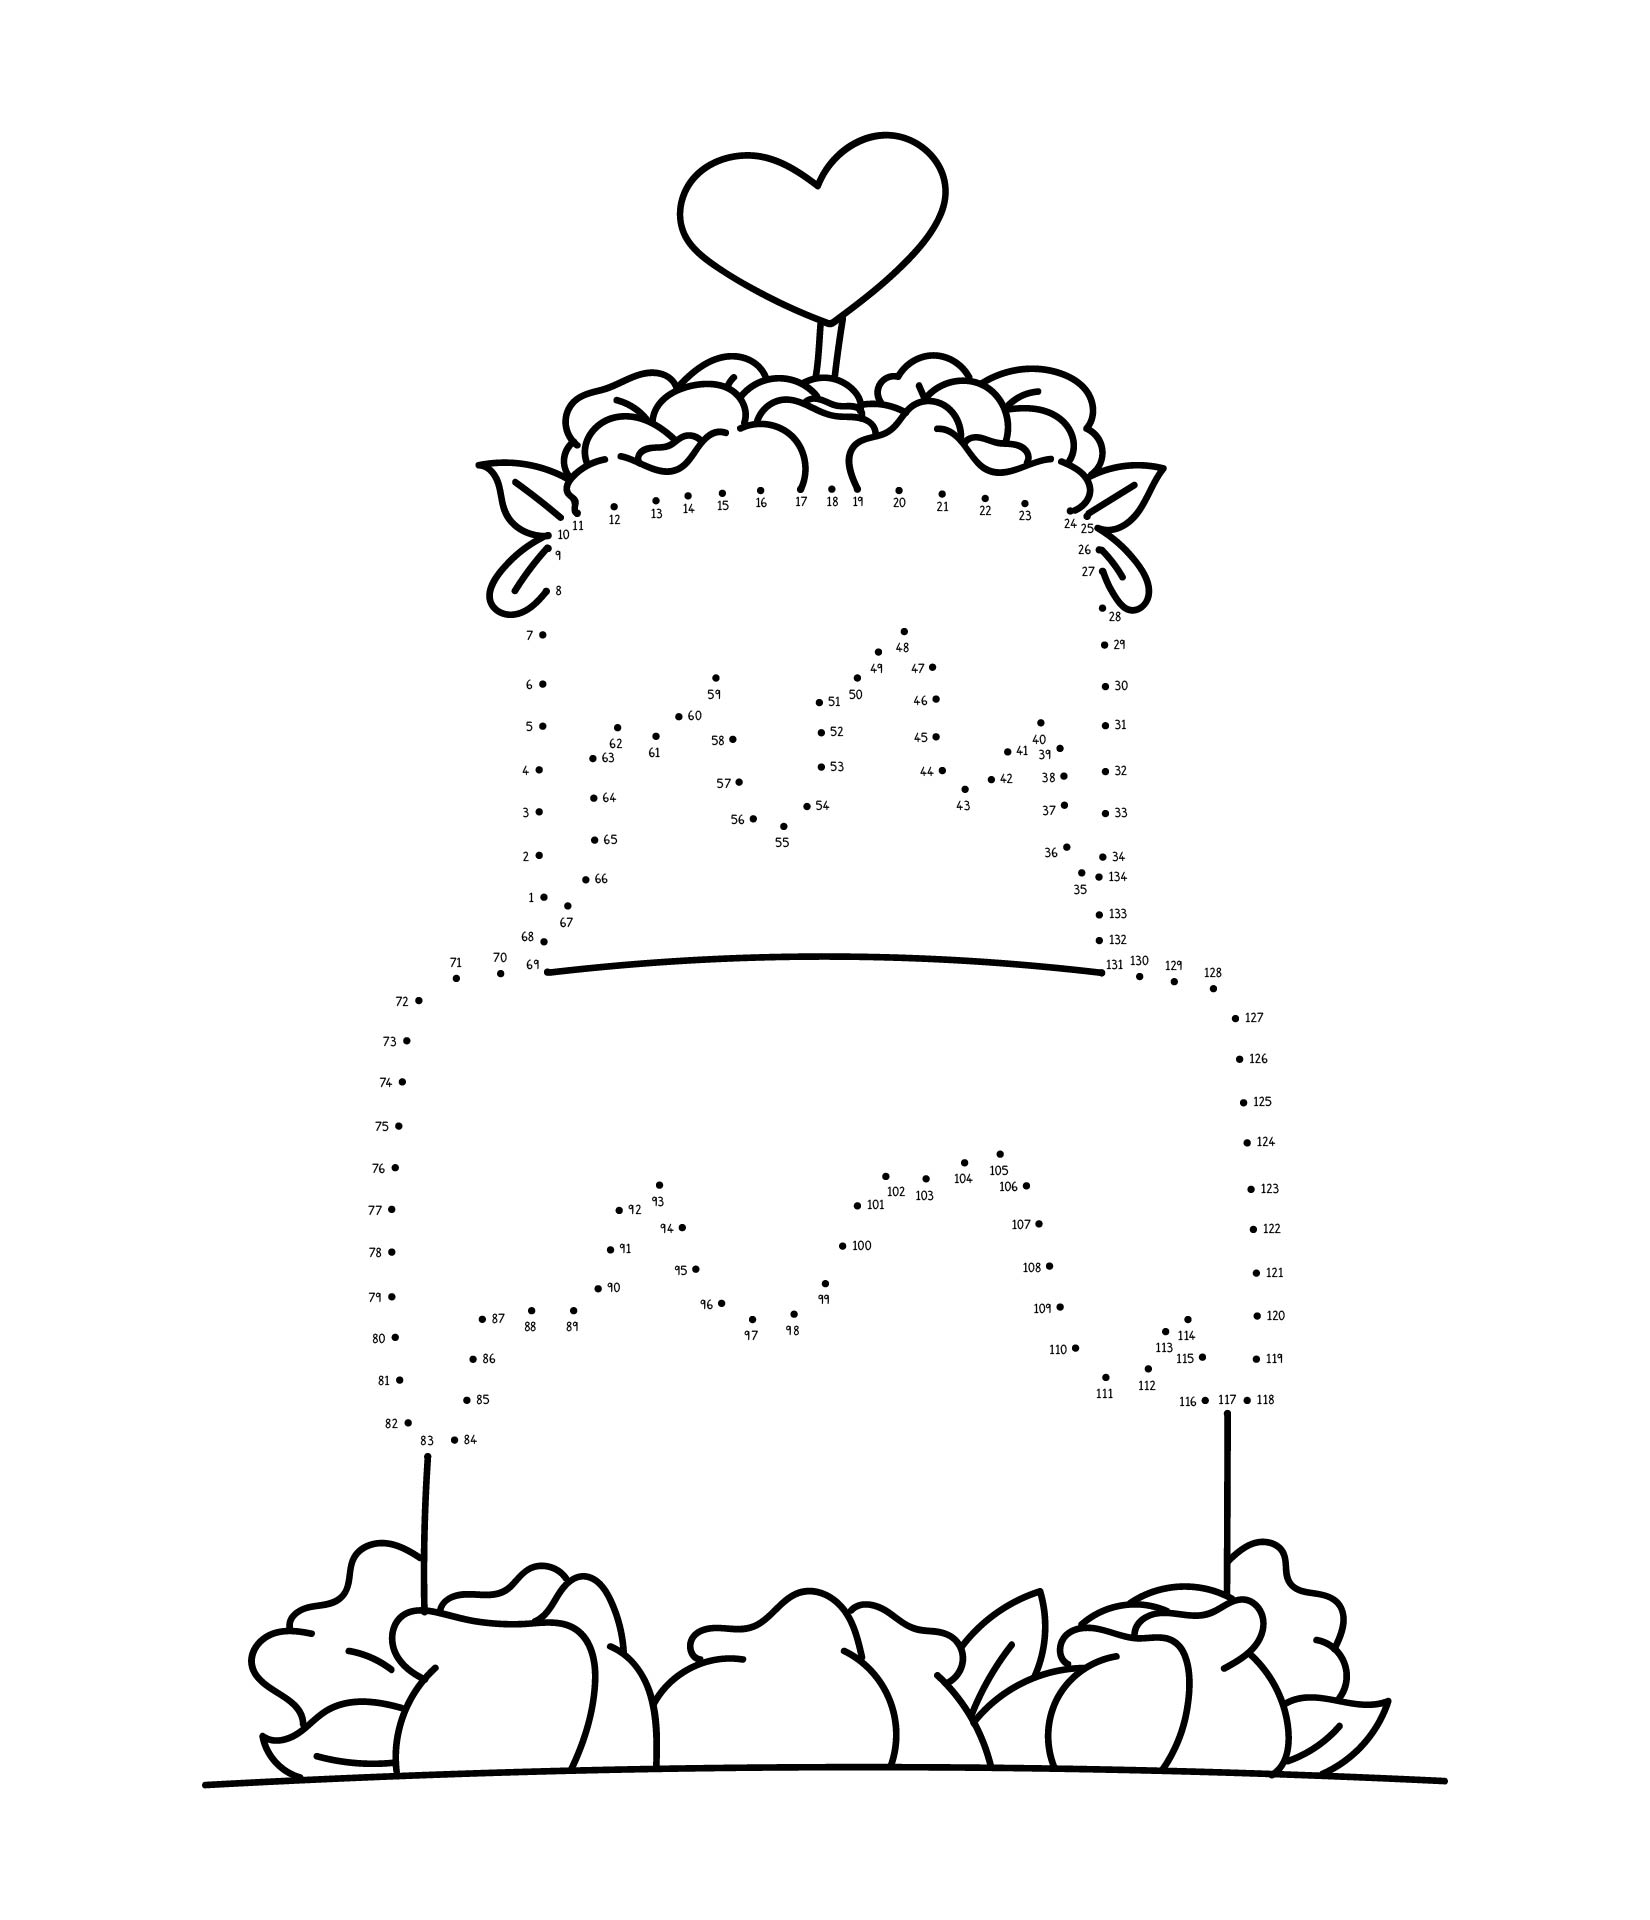 6 Best Images of Wedding Dot To Dot Printables Free Printable Connect